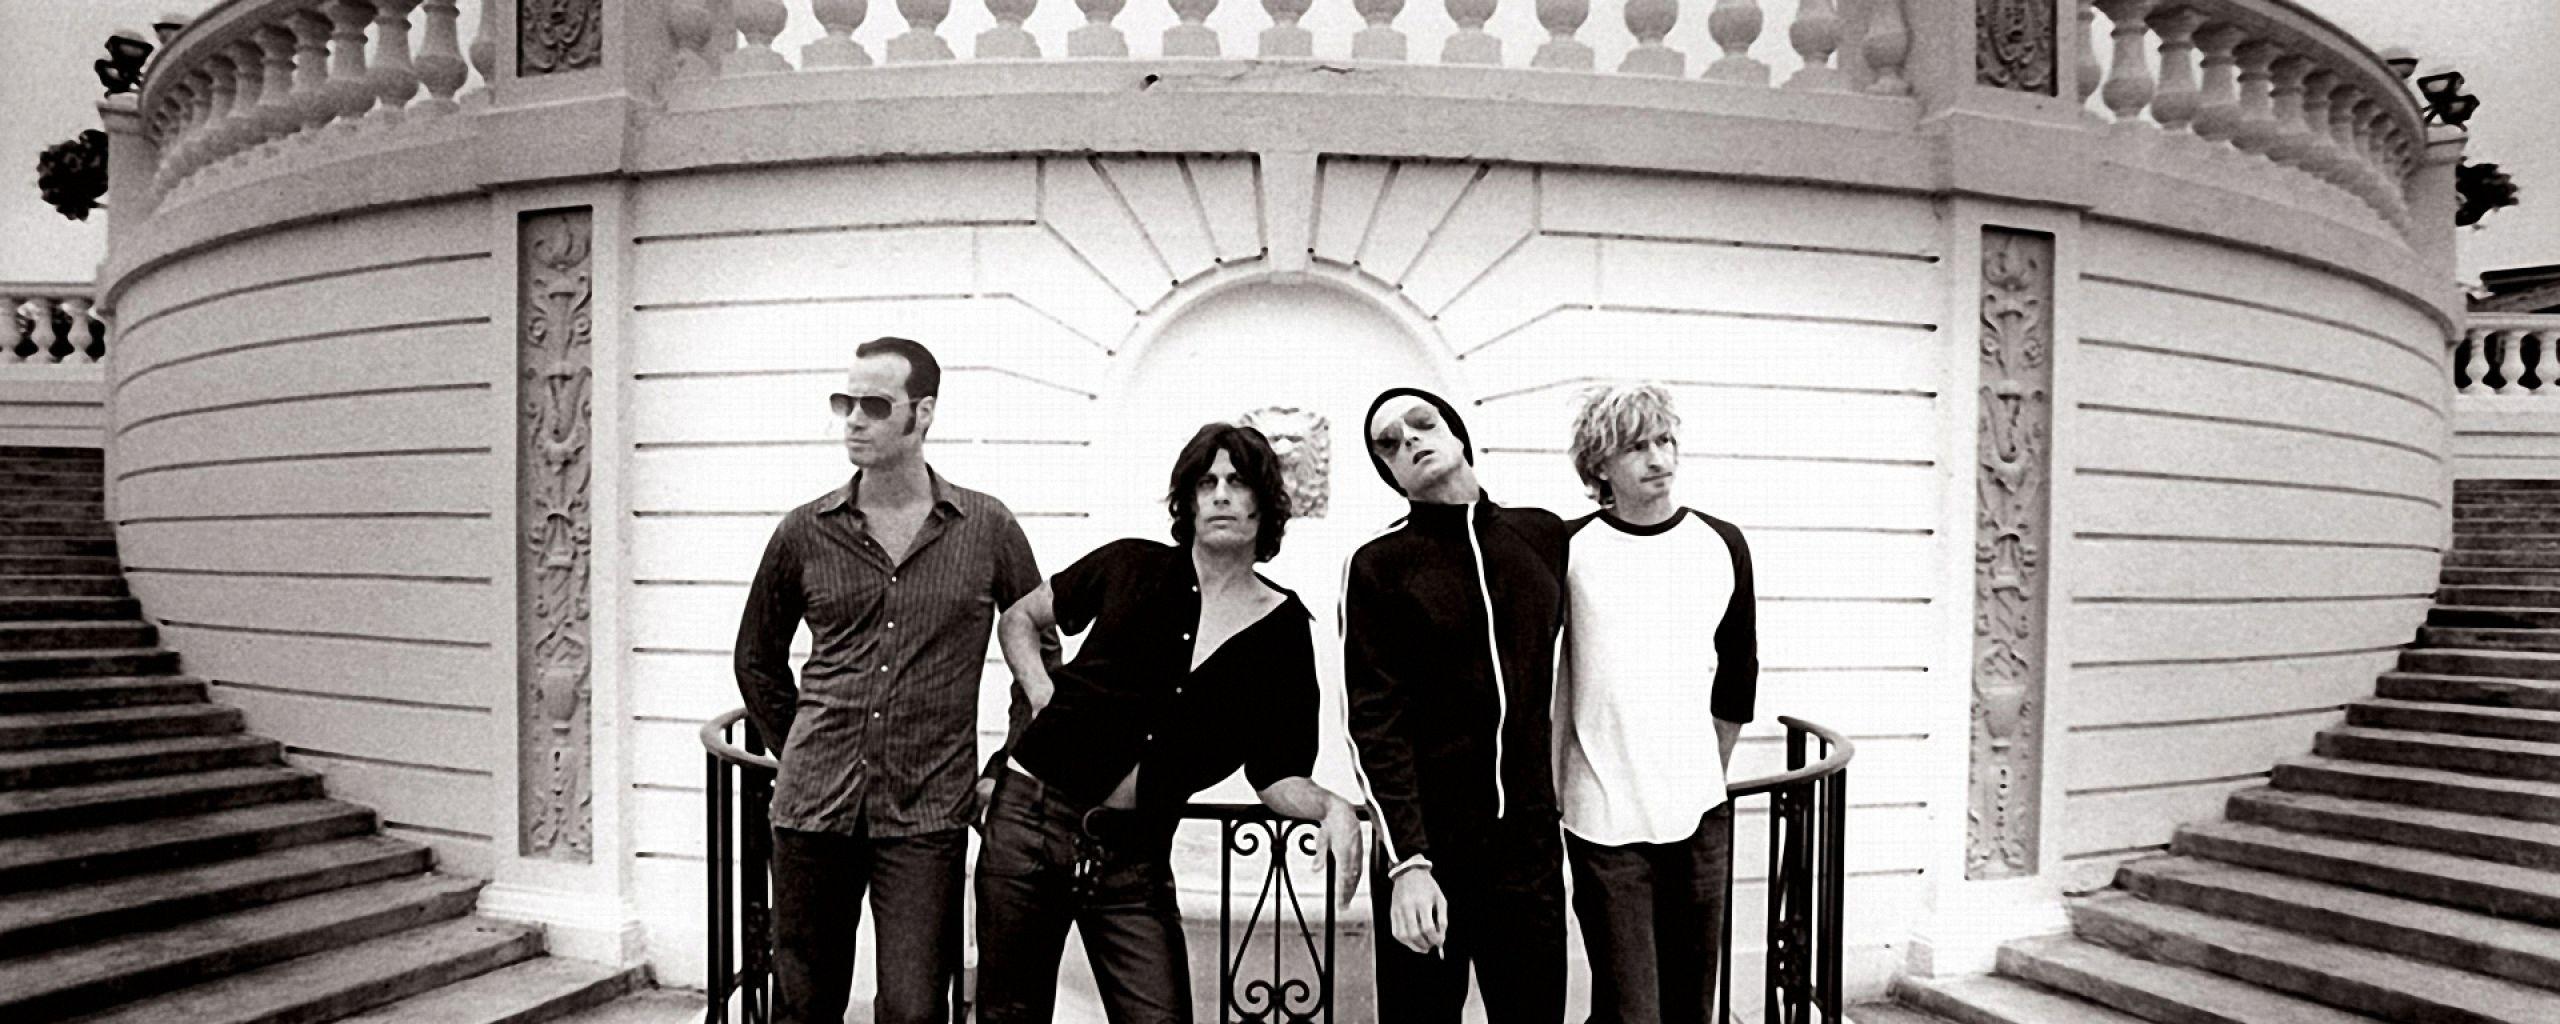 Download Wallpapers 2560x1024 Stone temple pilots, Band, Glasses